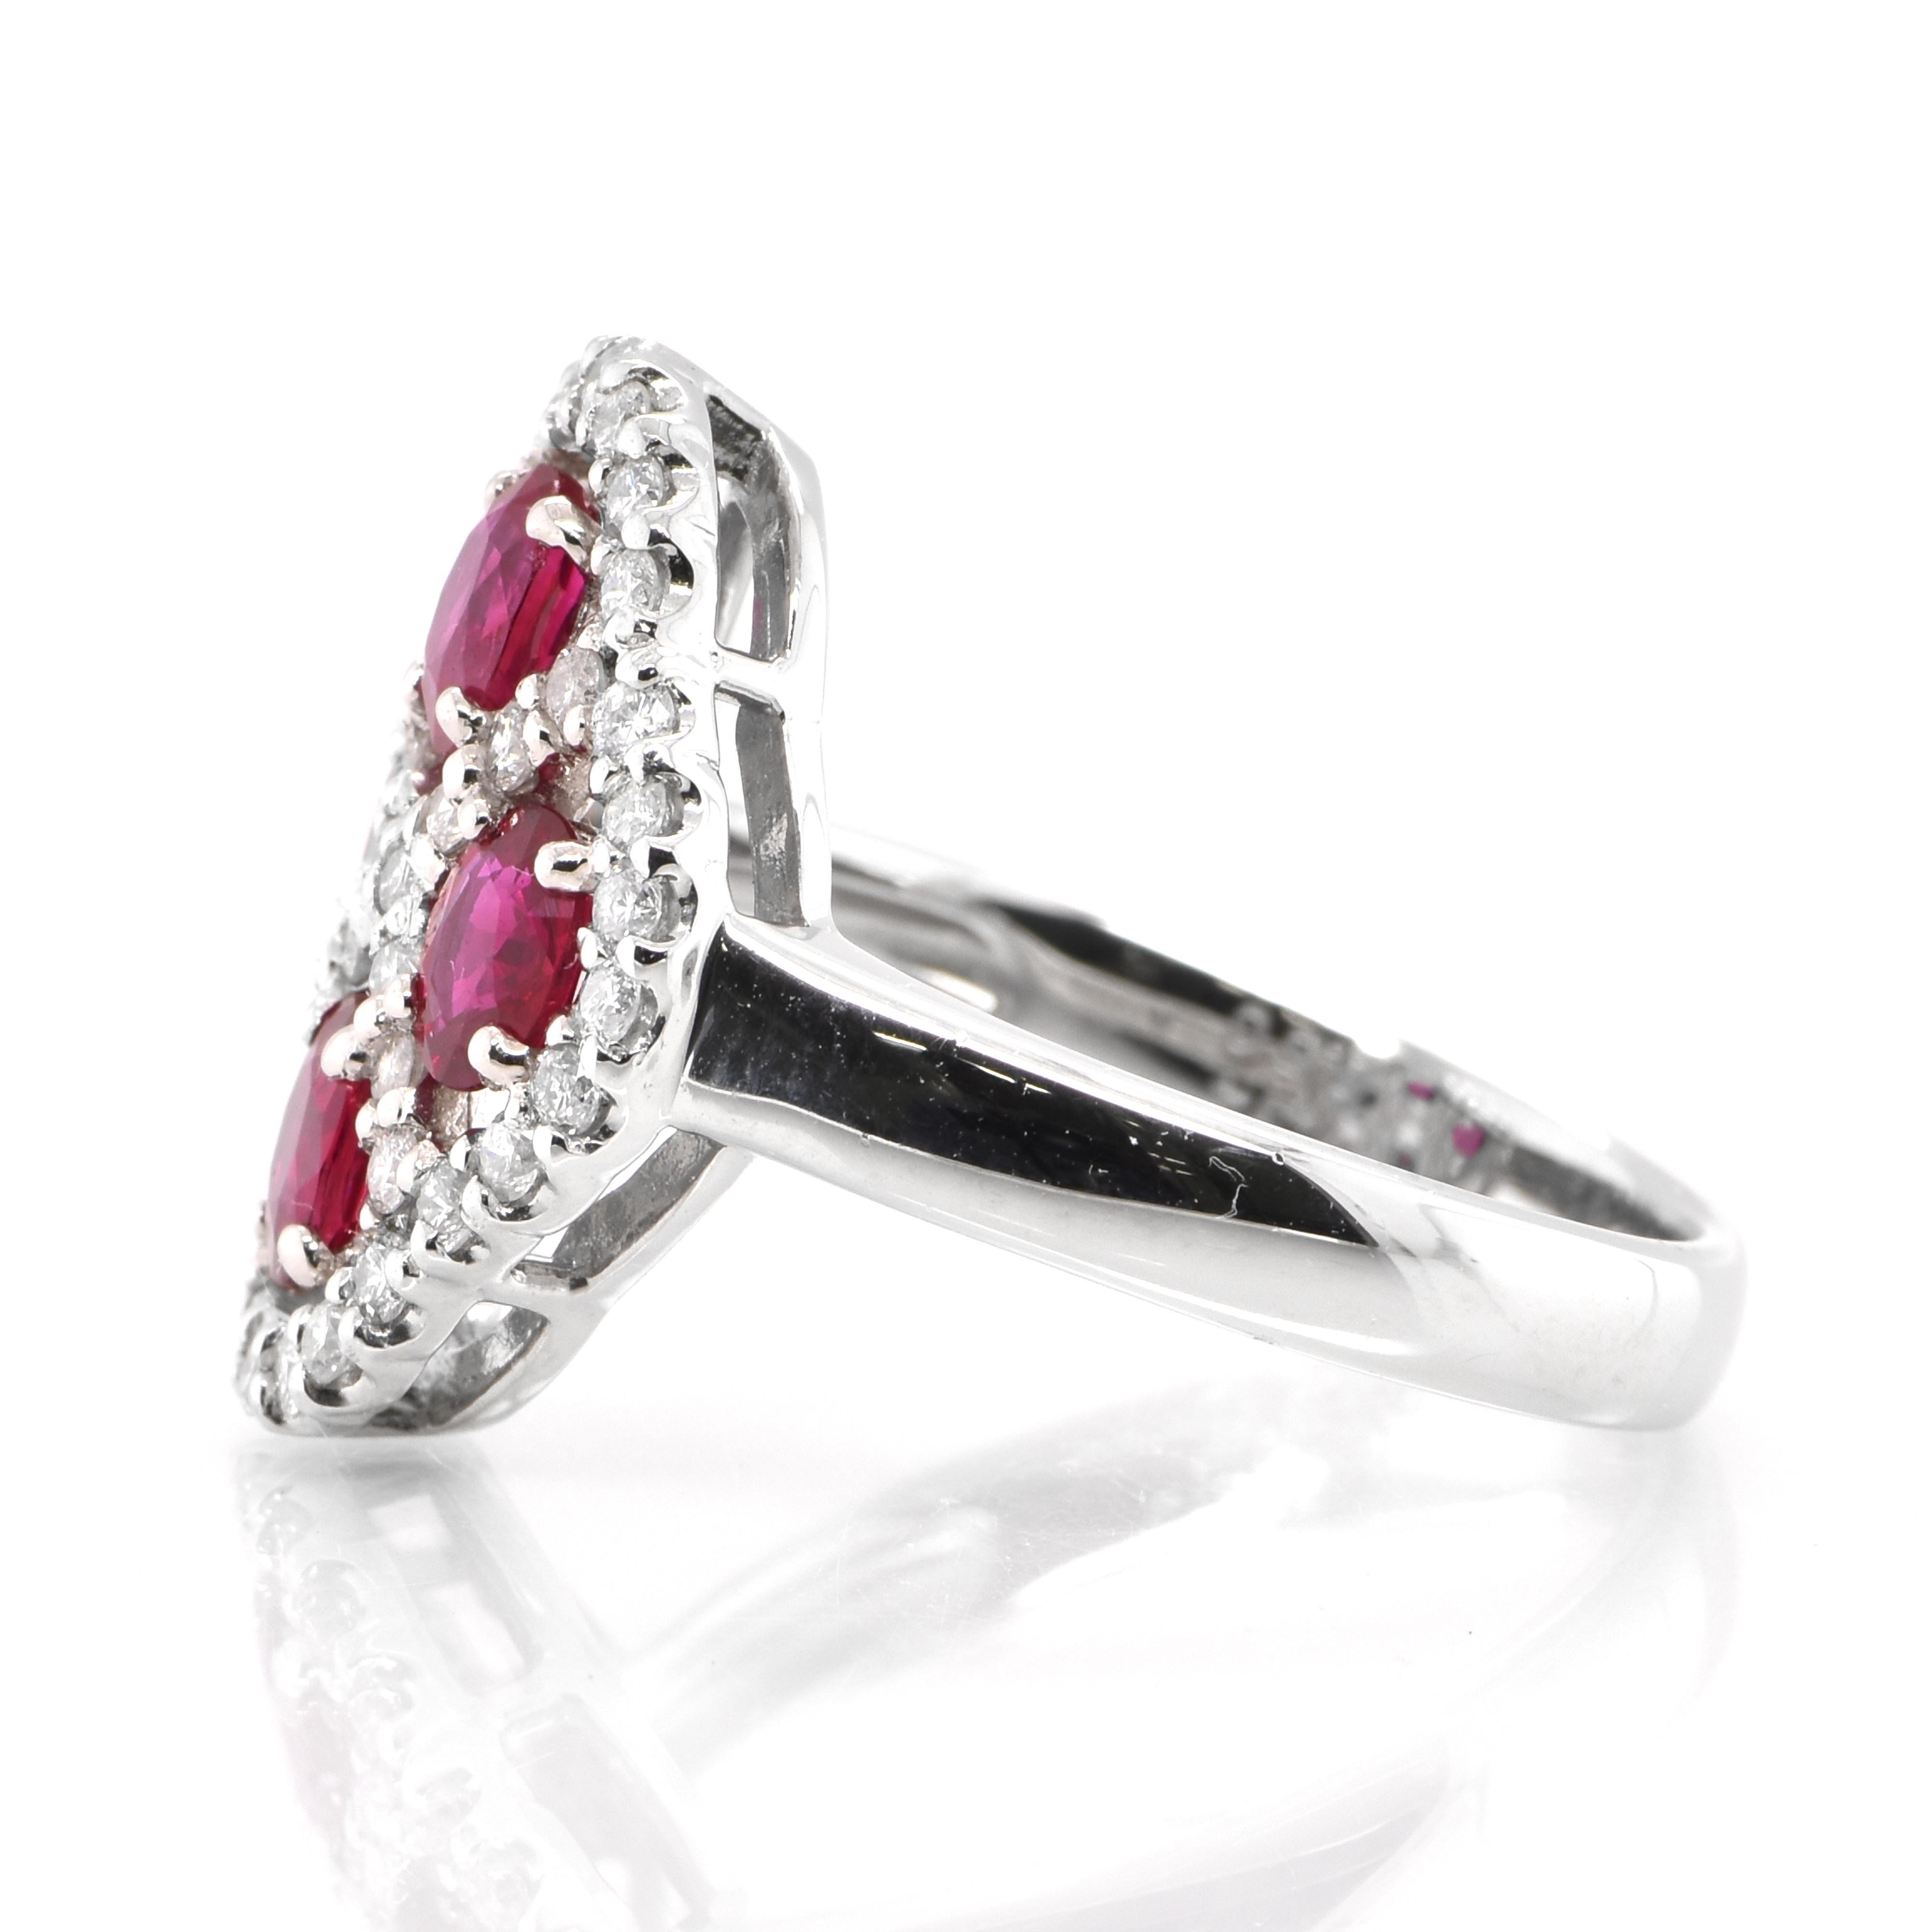 Oval Cut 1.34 Carat Natural Rubies and Diamond Cocktail Ring Set in Platinum For Sale